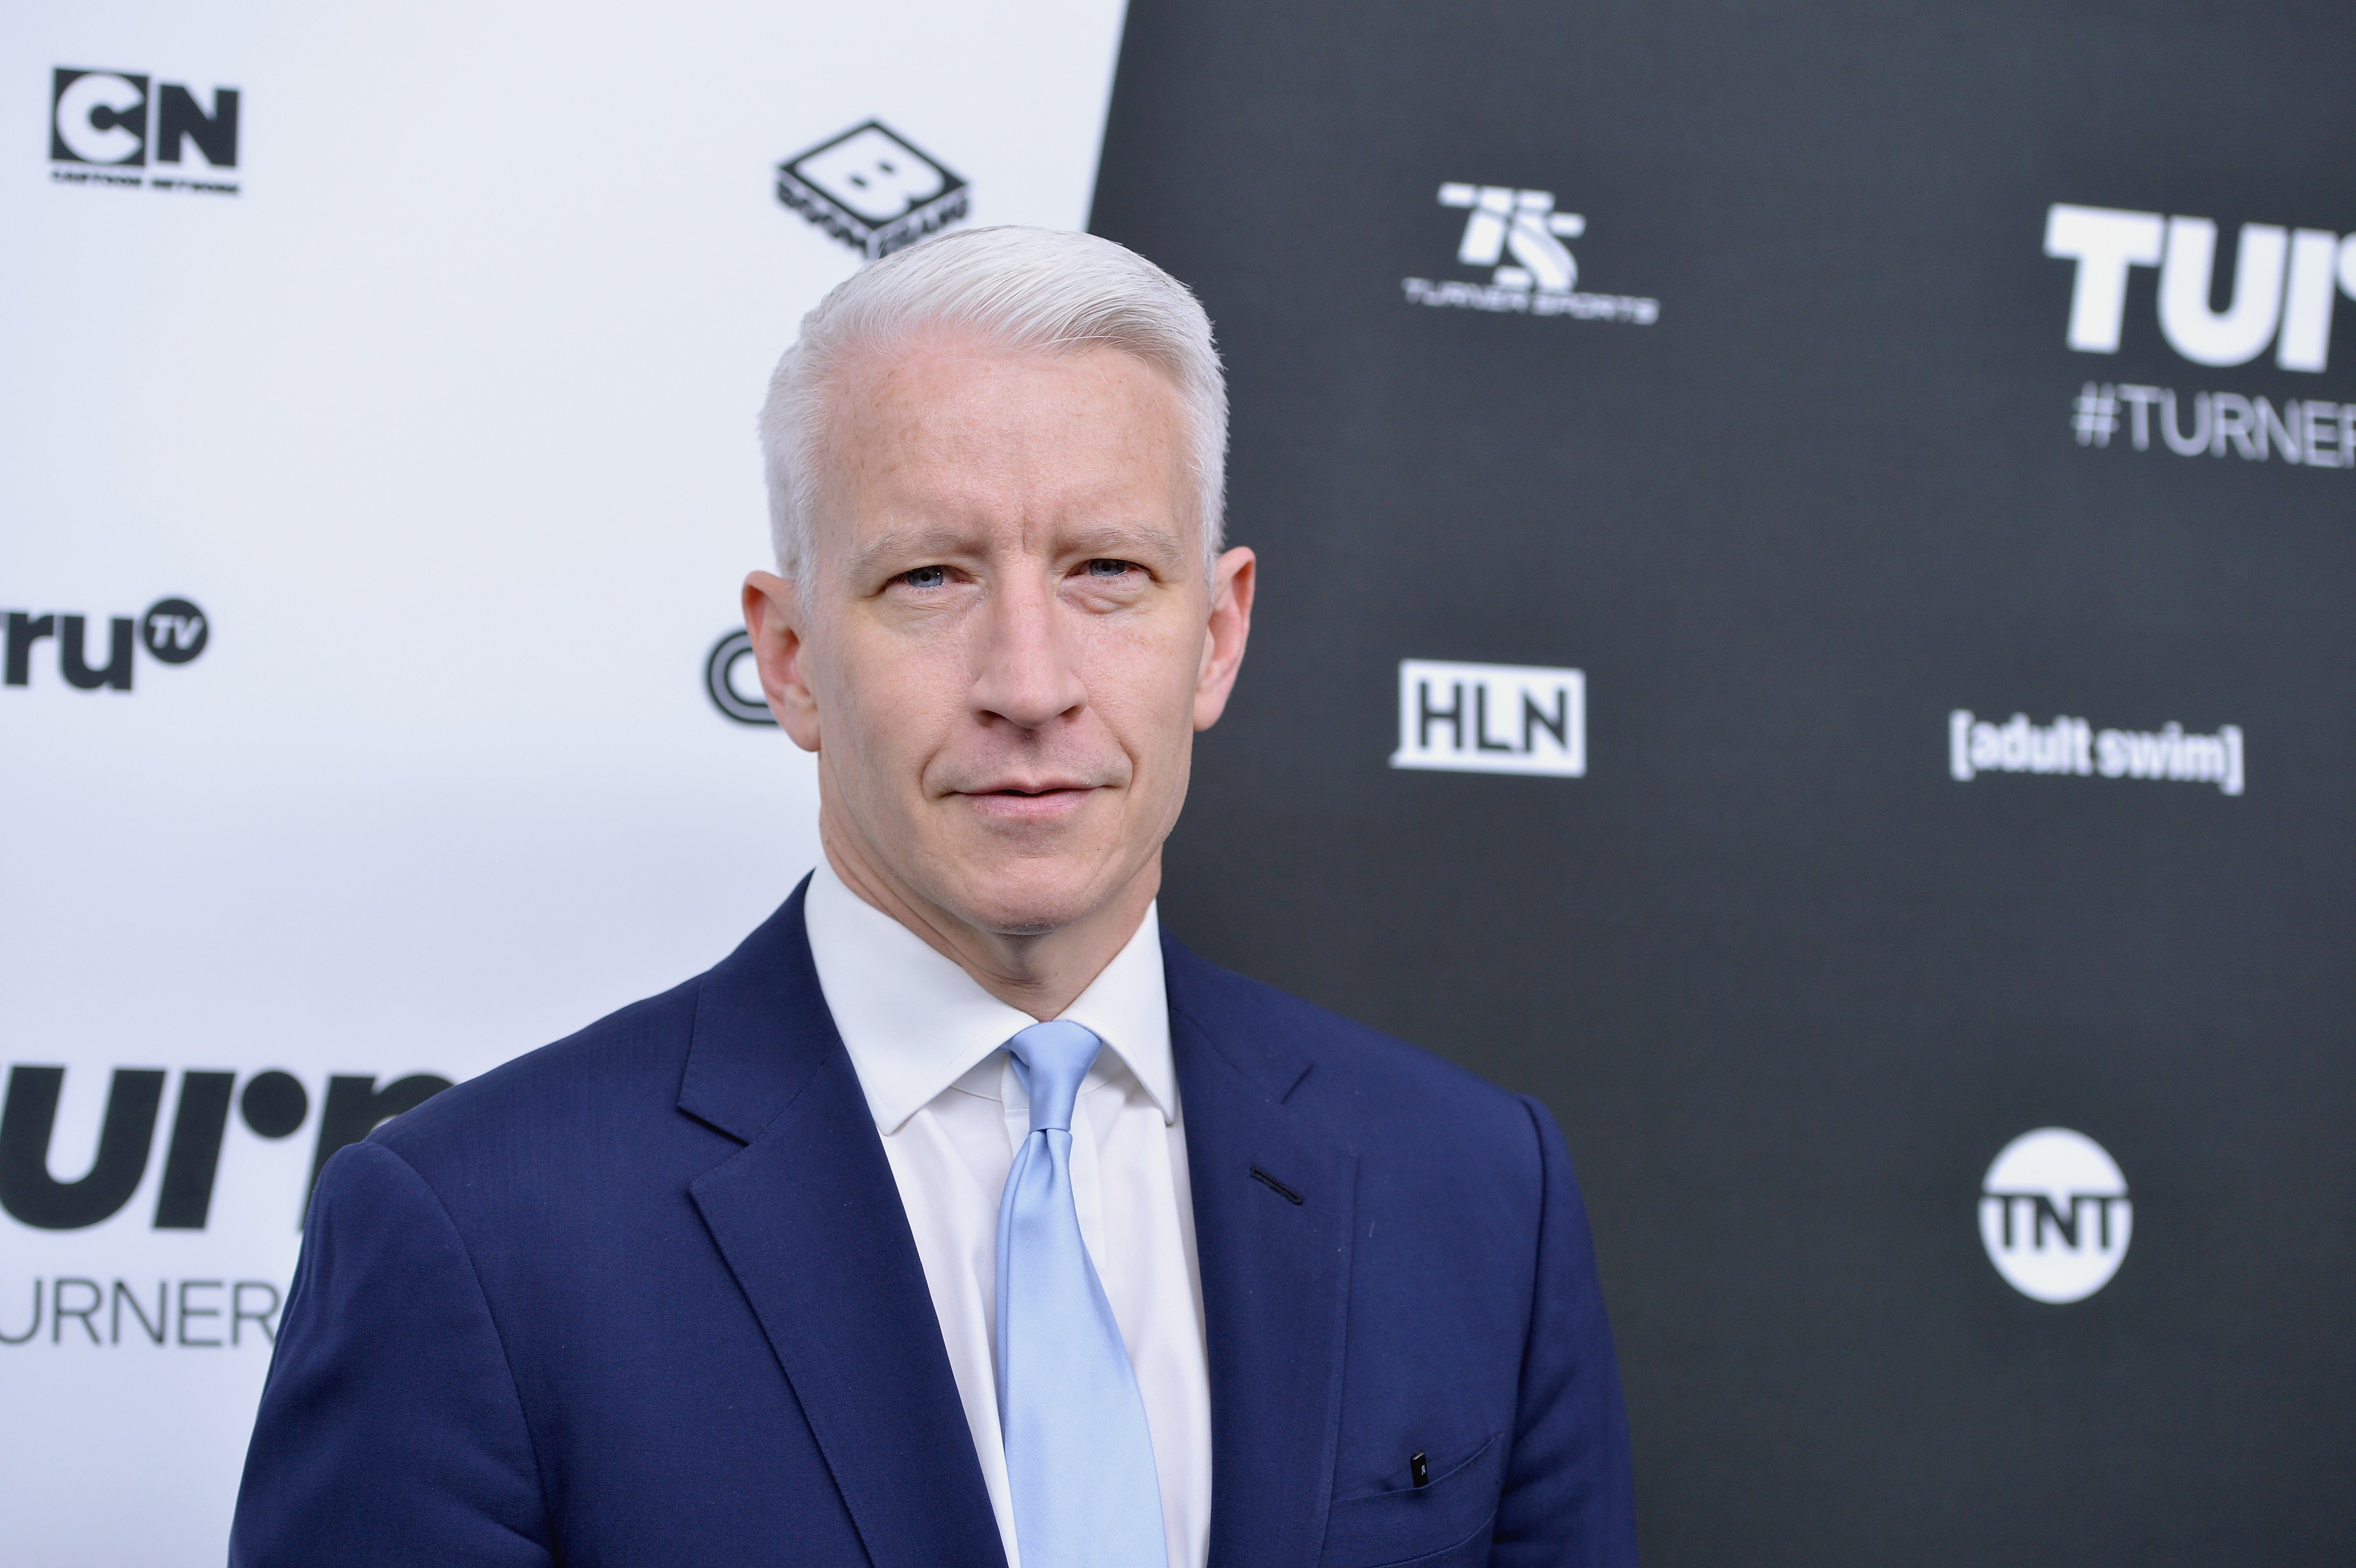 Anderson Cooper attends the Turner Upfront 2016 at Nick & Stef's Steakhouse on May 18, 2016 in New York City | Photo: Getty Images